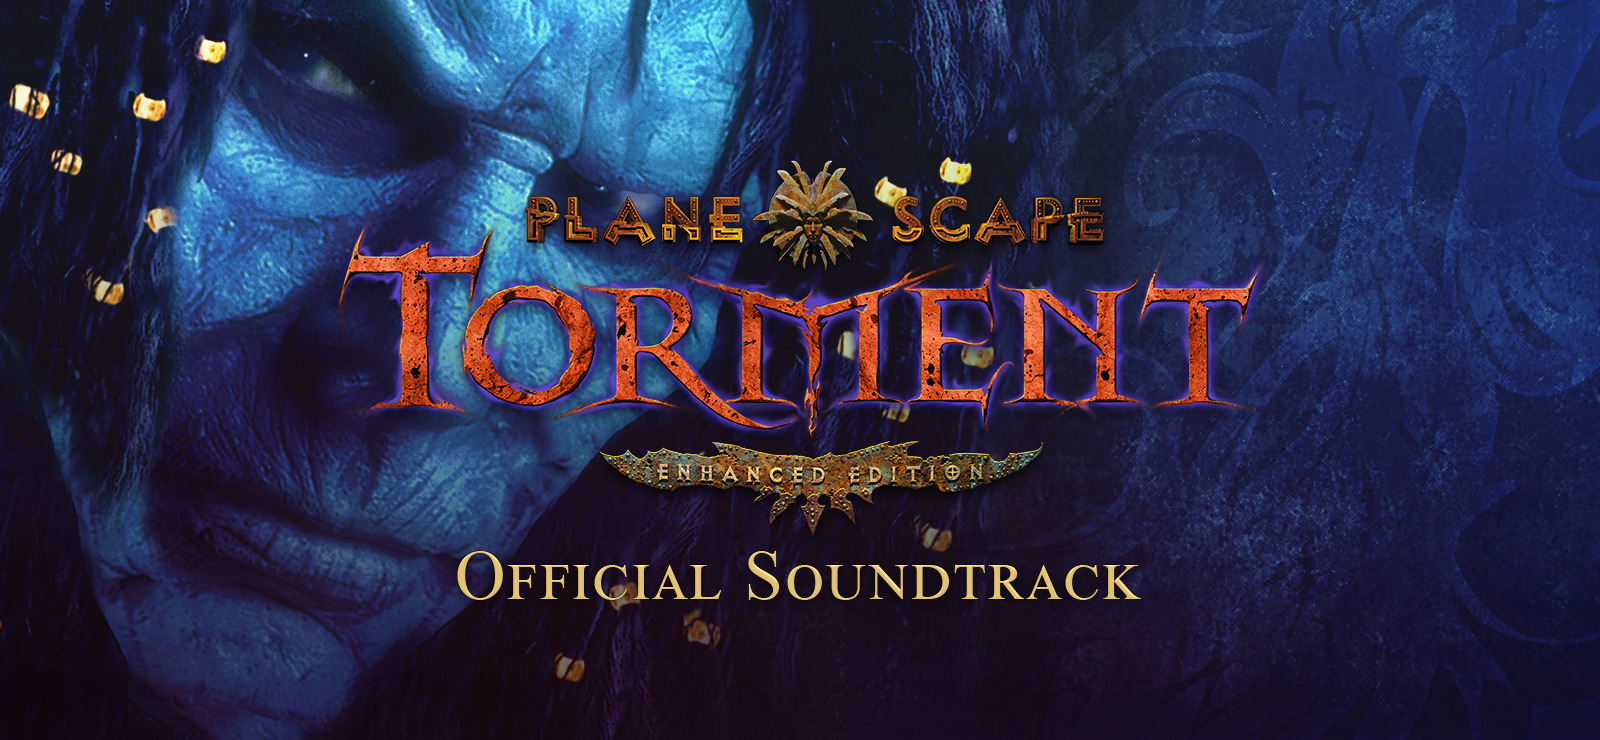 Edition Torment: Enhanced Soundtrack Planescape: Official on